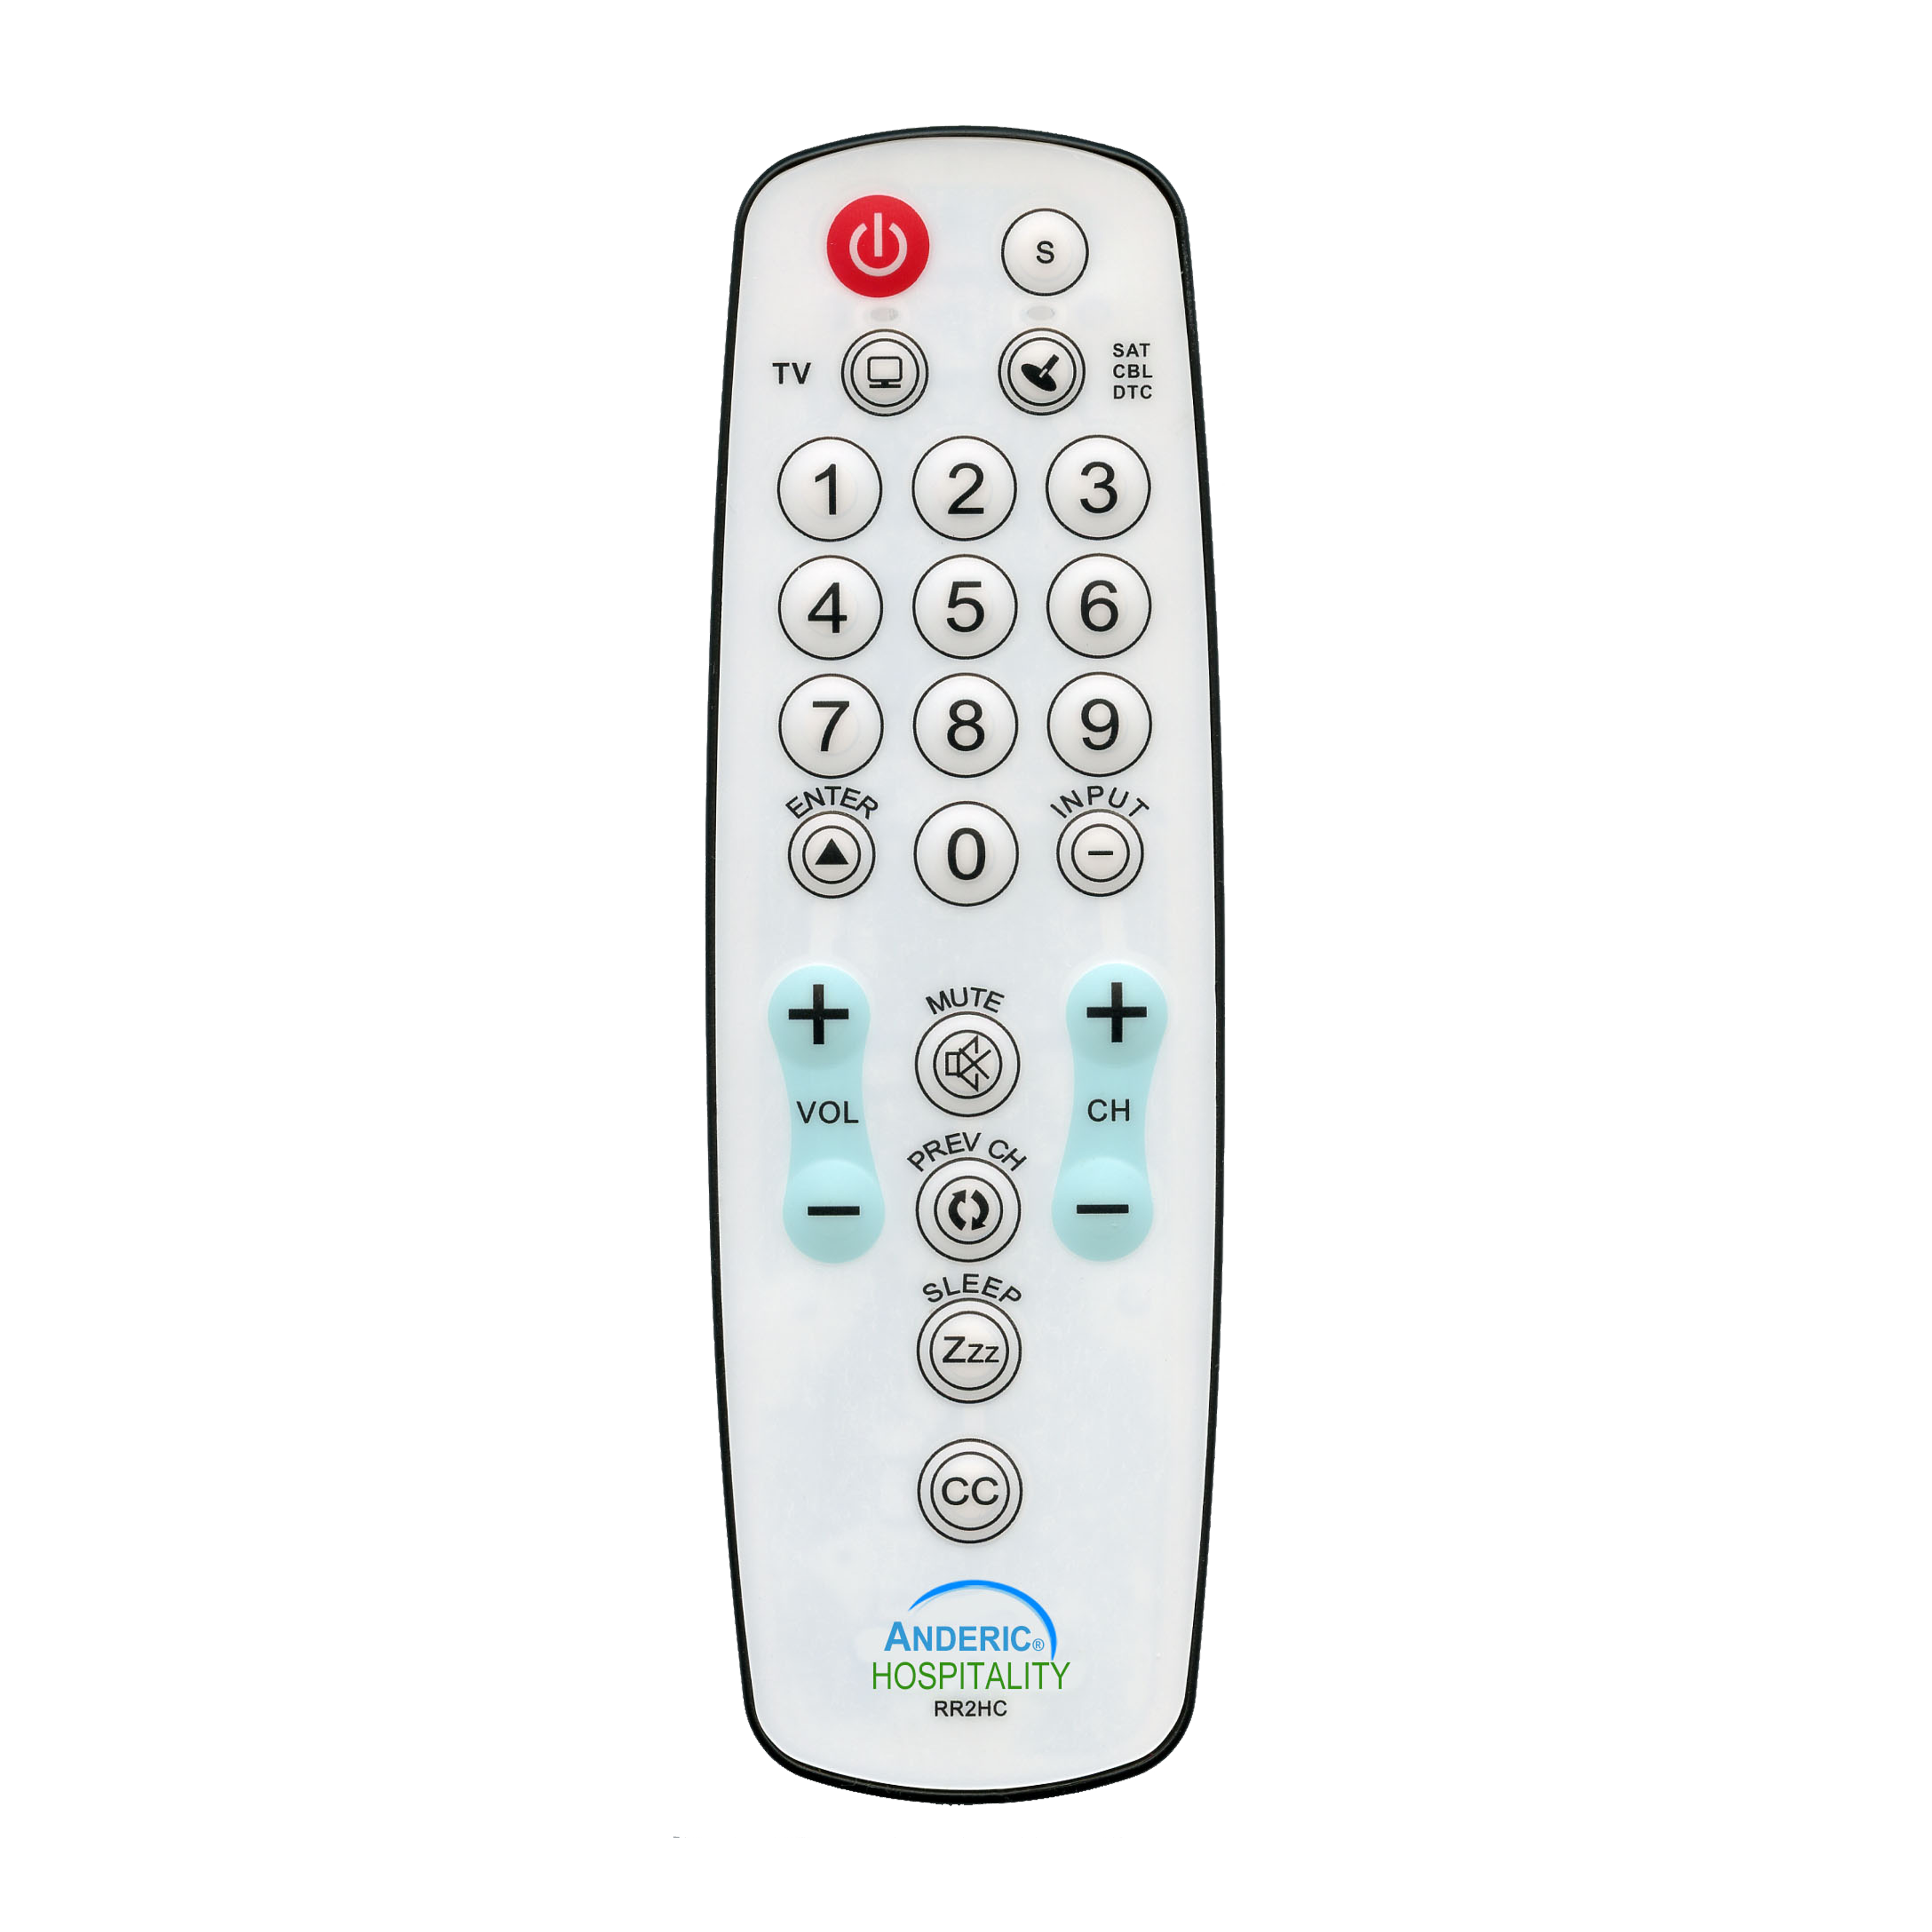 RR2HDC 2-Device Universal EzWipe Remote Control for Hospitality TVs & In-Room DirecTv® Boxes